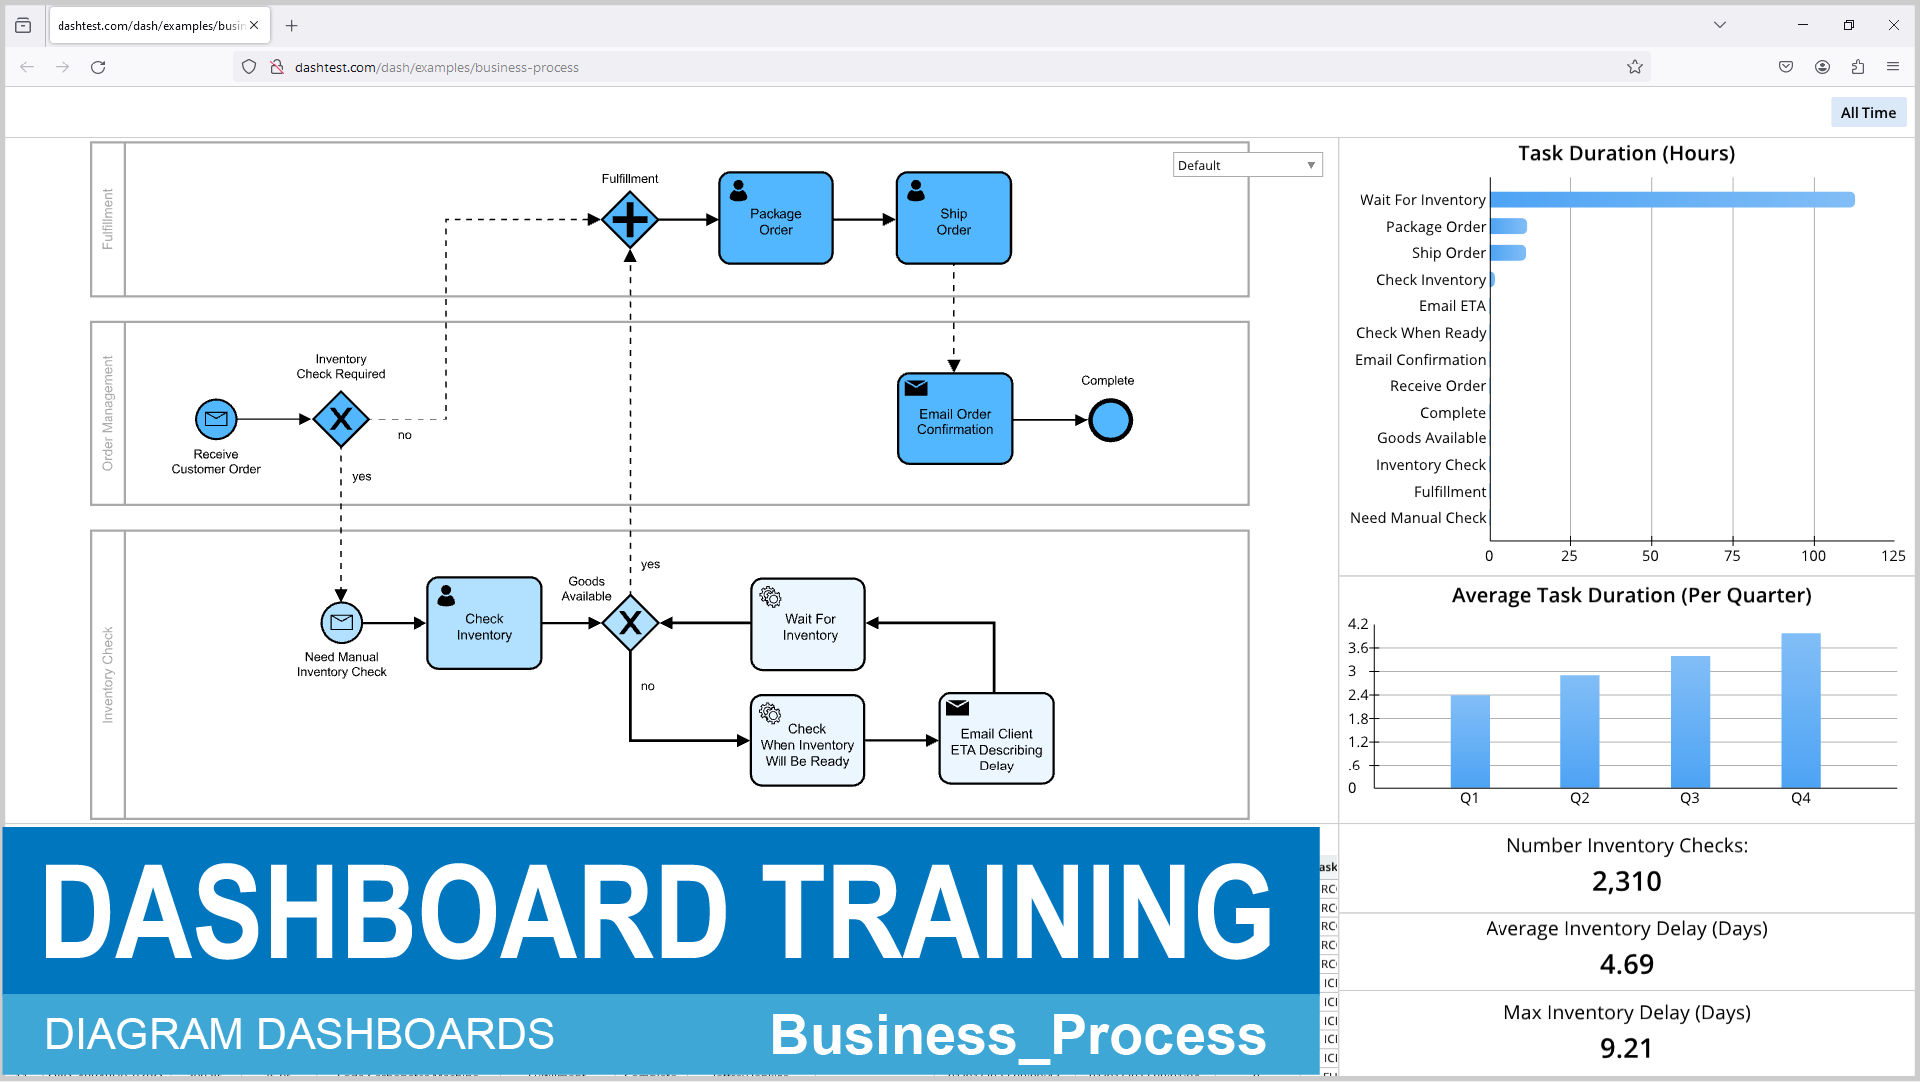 A diagram displaying a business process, including a dashboard training section.